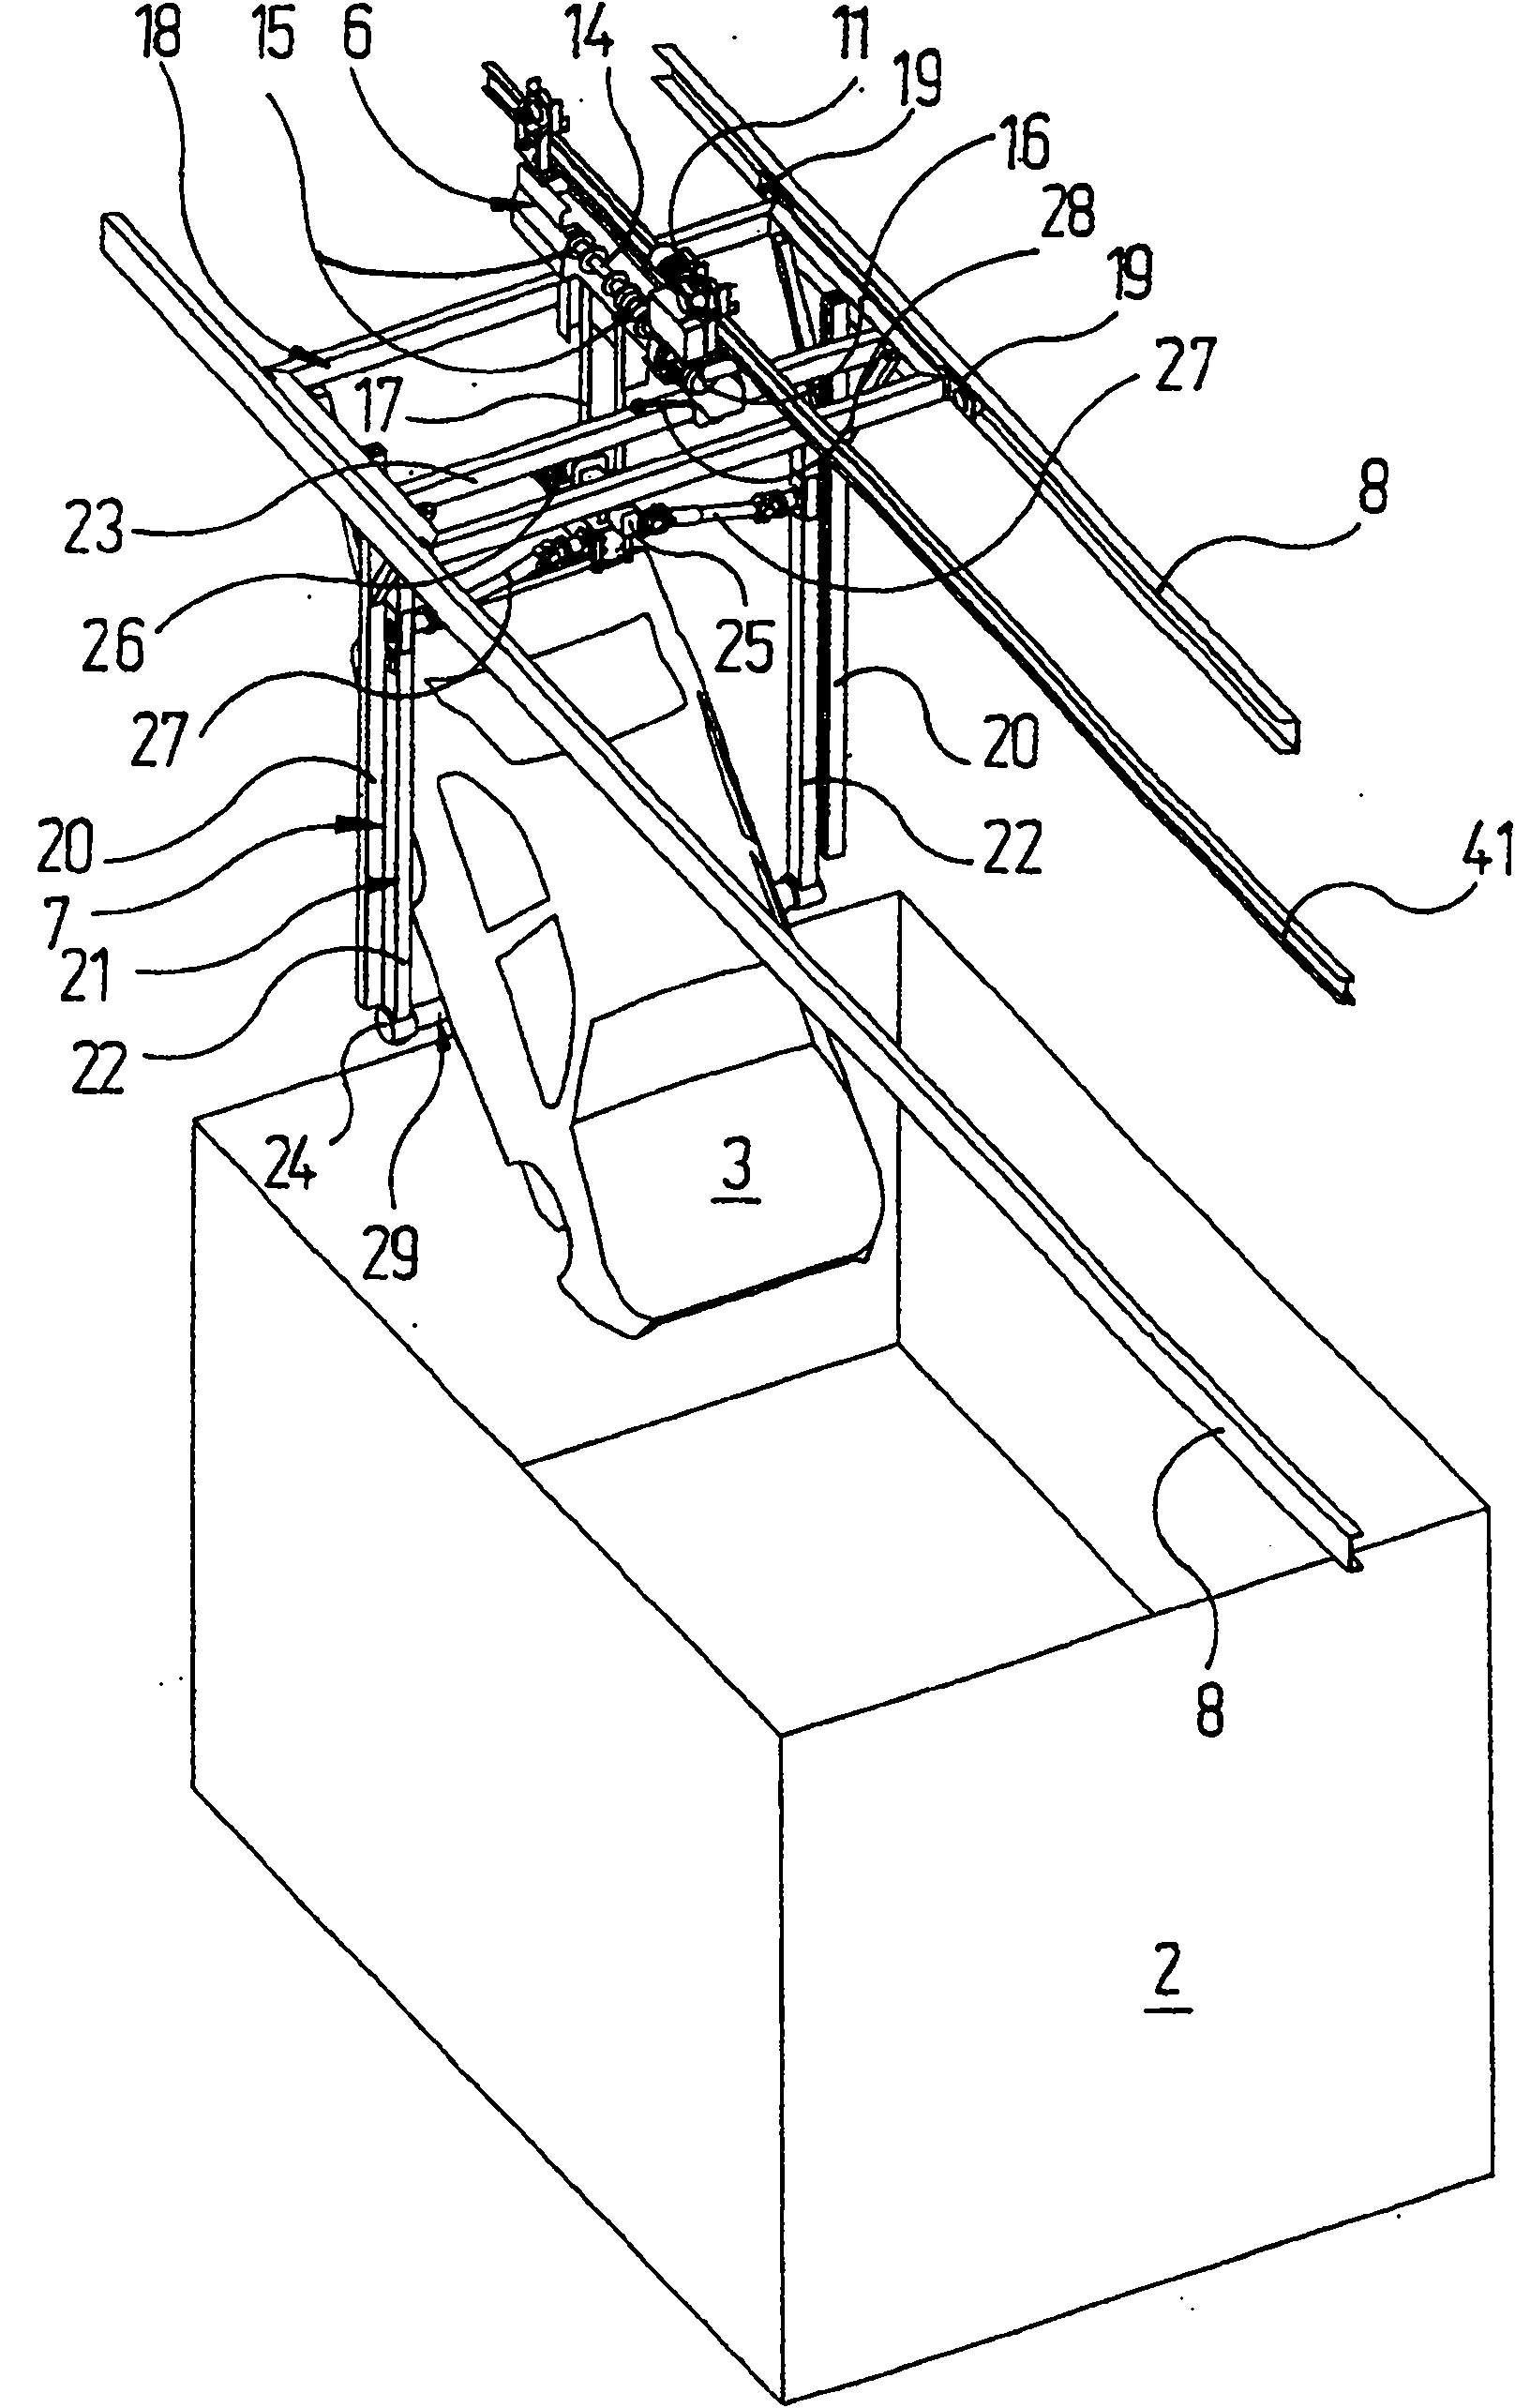 Immersion treatment system